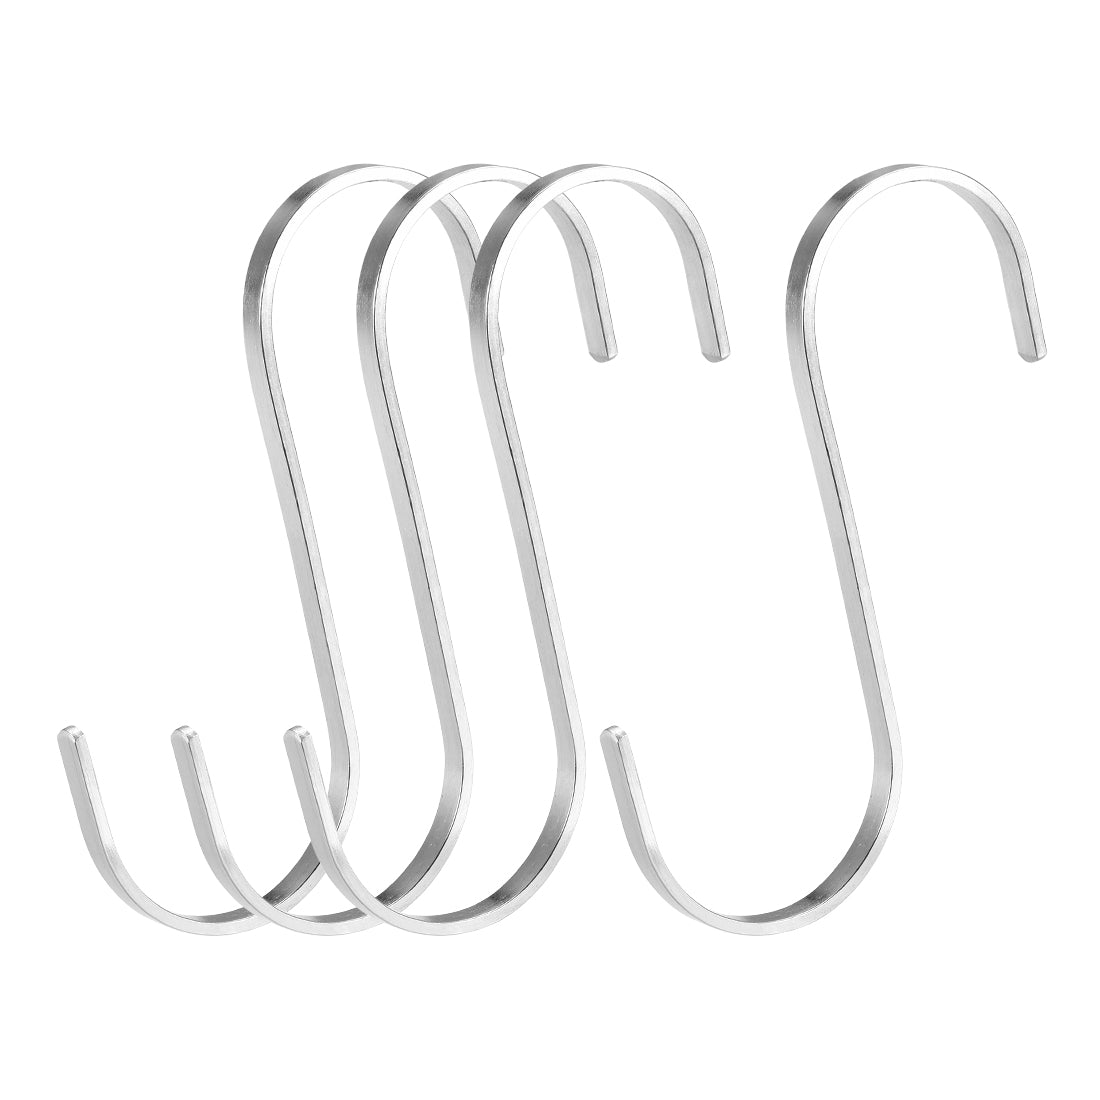 uxcell Uxcell Stainless Steel S Hooks 4.4" Flat S Shaped Hook Hangers 4pcs